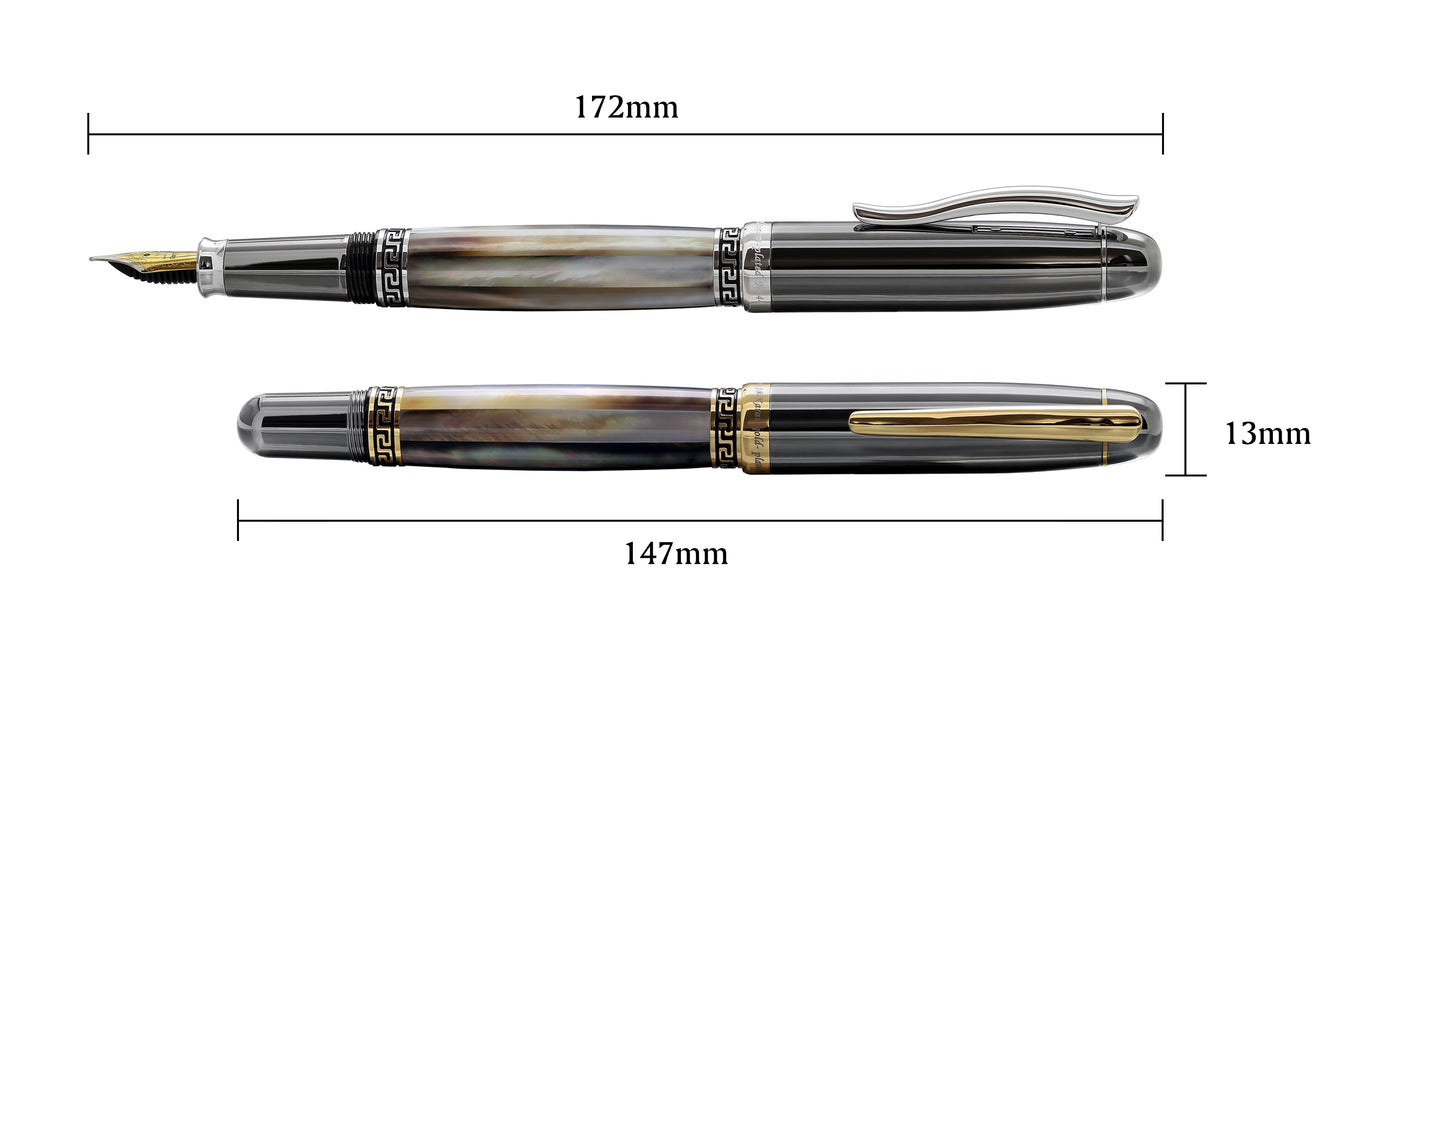 Xezo - Comparison between horizontal capped and uncapped Maestro Black MOP Tungsten F-PL fountain pens. The uncapped  Maestro Black MOP Tungsten fountain pen measures 172mm in length and the capped Maestro Black MOP Tungsten fountain pen measures 147mm in length and 13mm in width.